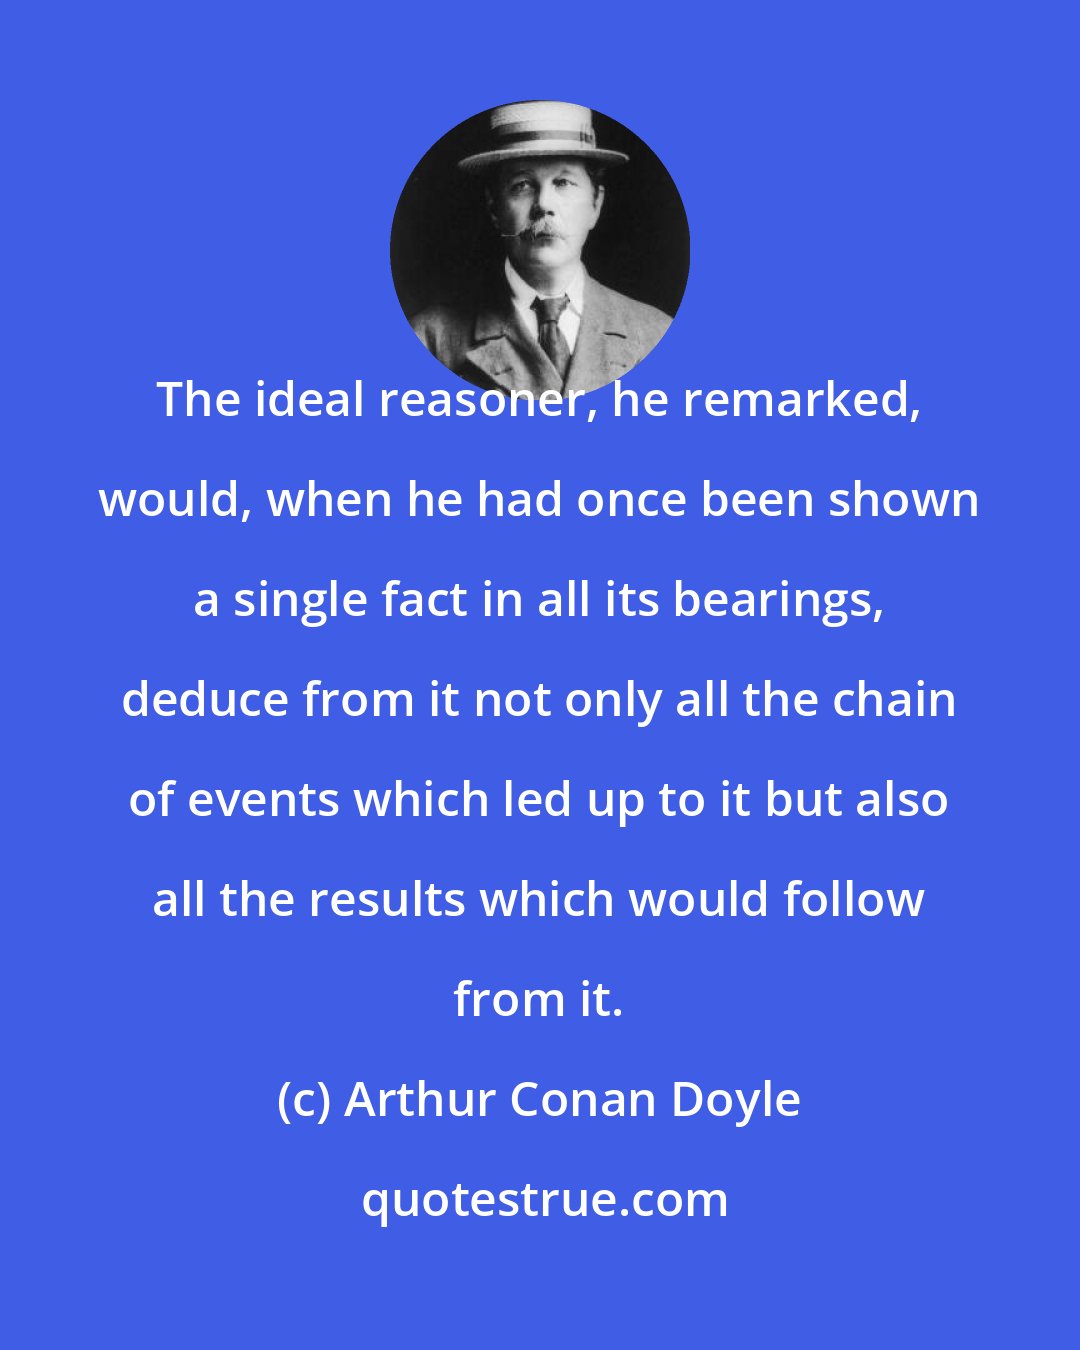 Arthur Conan Doyle: The ideal reasoner, he remarked, would, when he had once been shown a single fact in all its bearings, deduce from it not only all the chain of events which led up to it but also all the results which would follow from it.